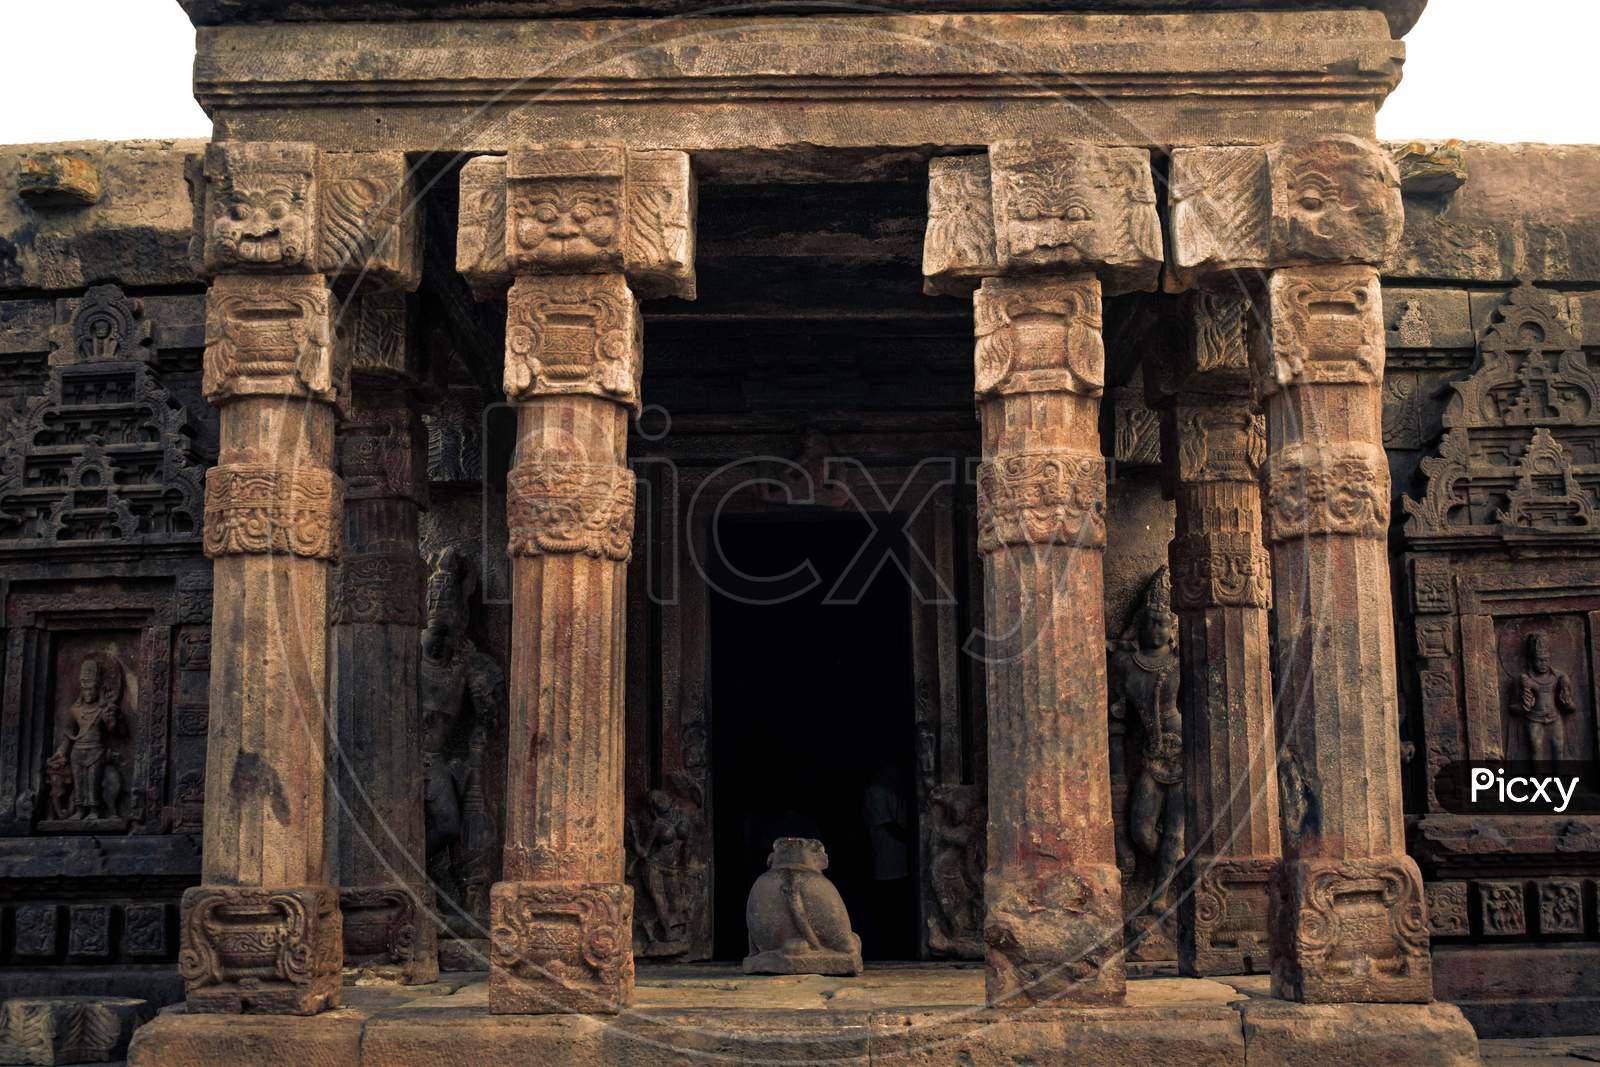 Architecture Of an Ancient Hindu Temple   With Pillars